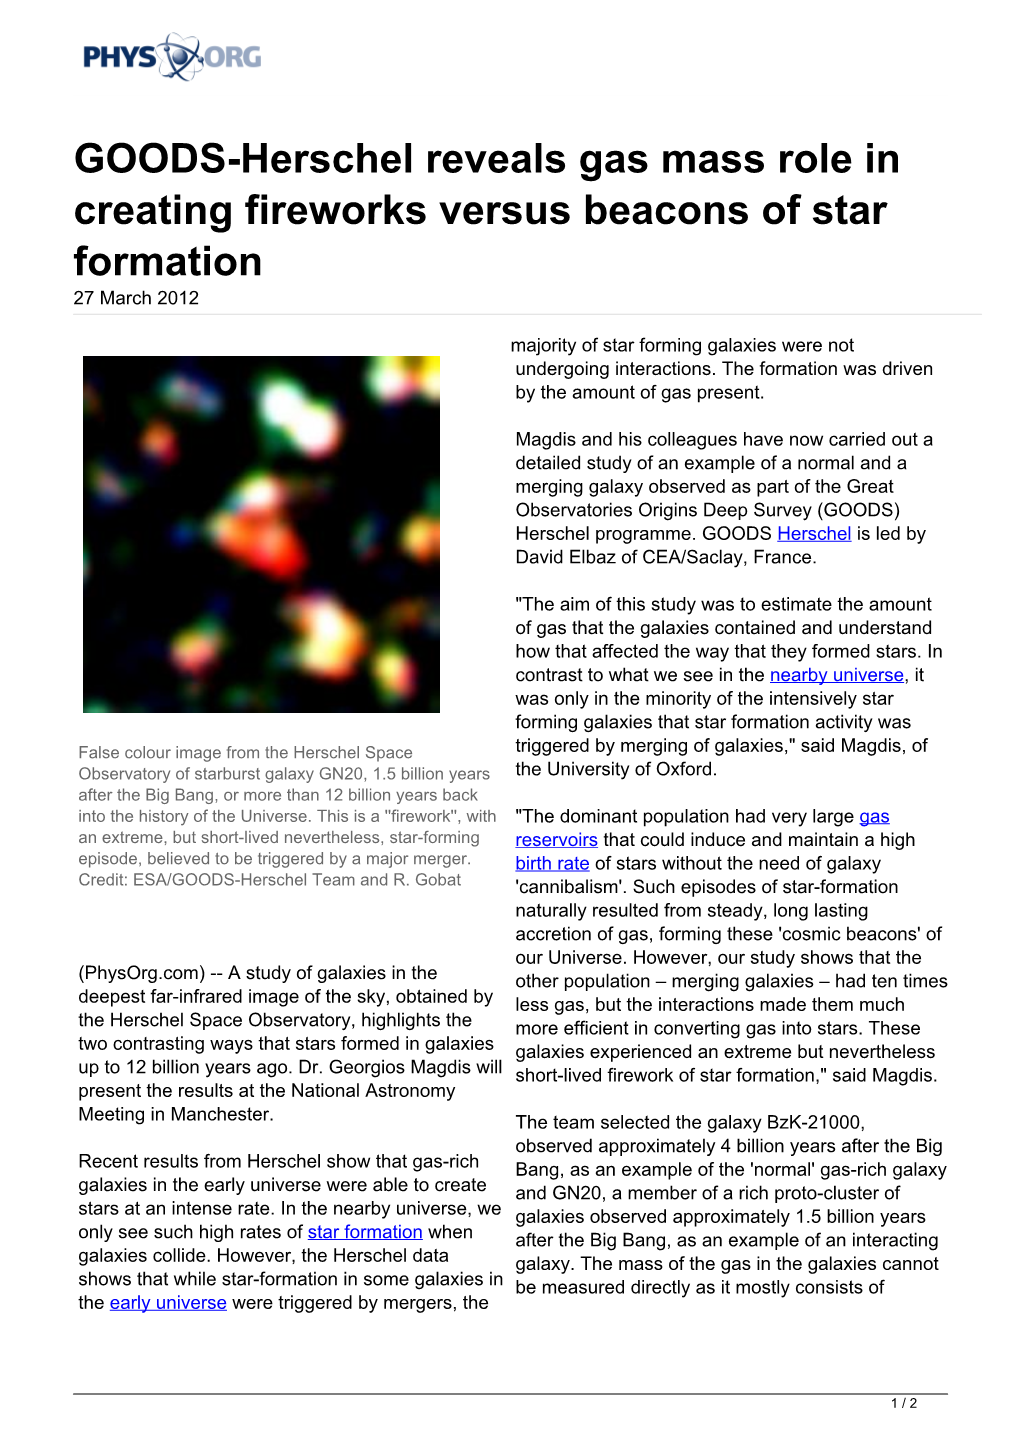 GOODS-Herschel Reveals Gas Mass Role in Creating Fireworks Versus Beacons of Star Formation 27 March 2012